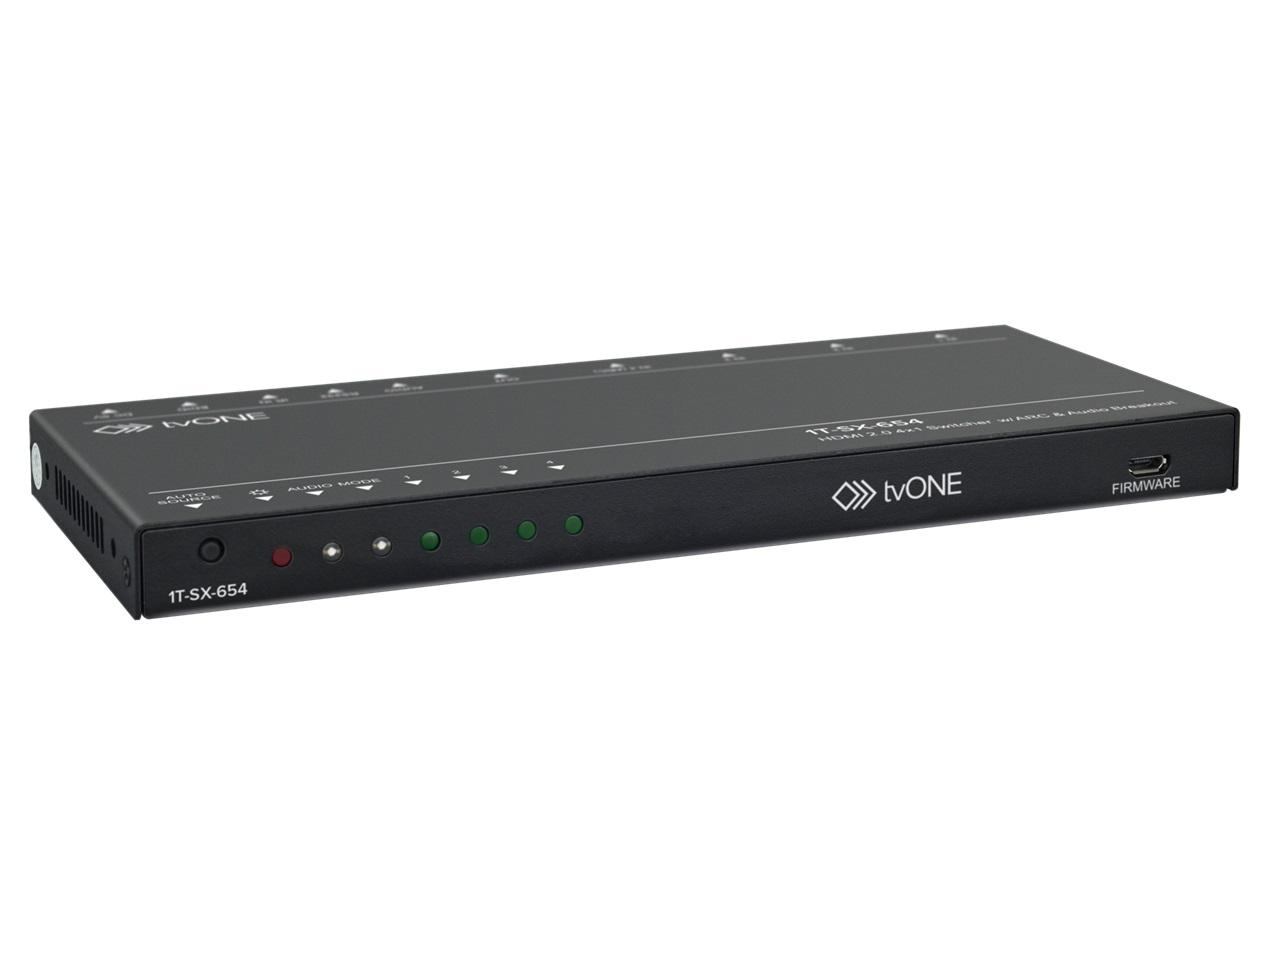 1T-SX-654 4x1 4K60 HDMI 2.0 Switcher with HDCP 2.2 by TV One